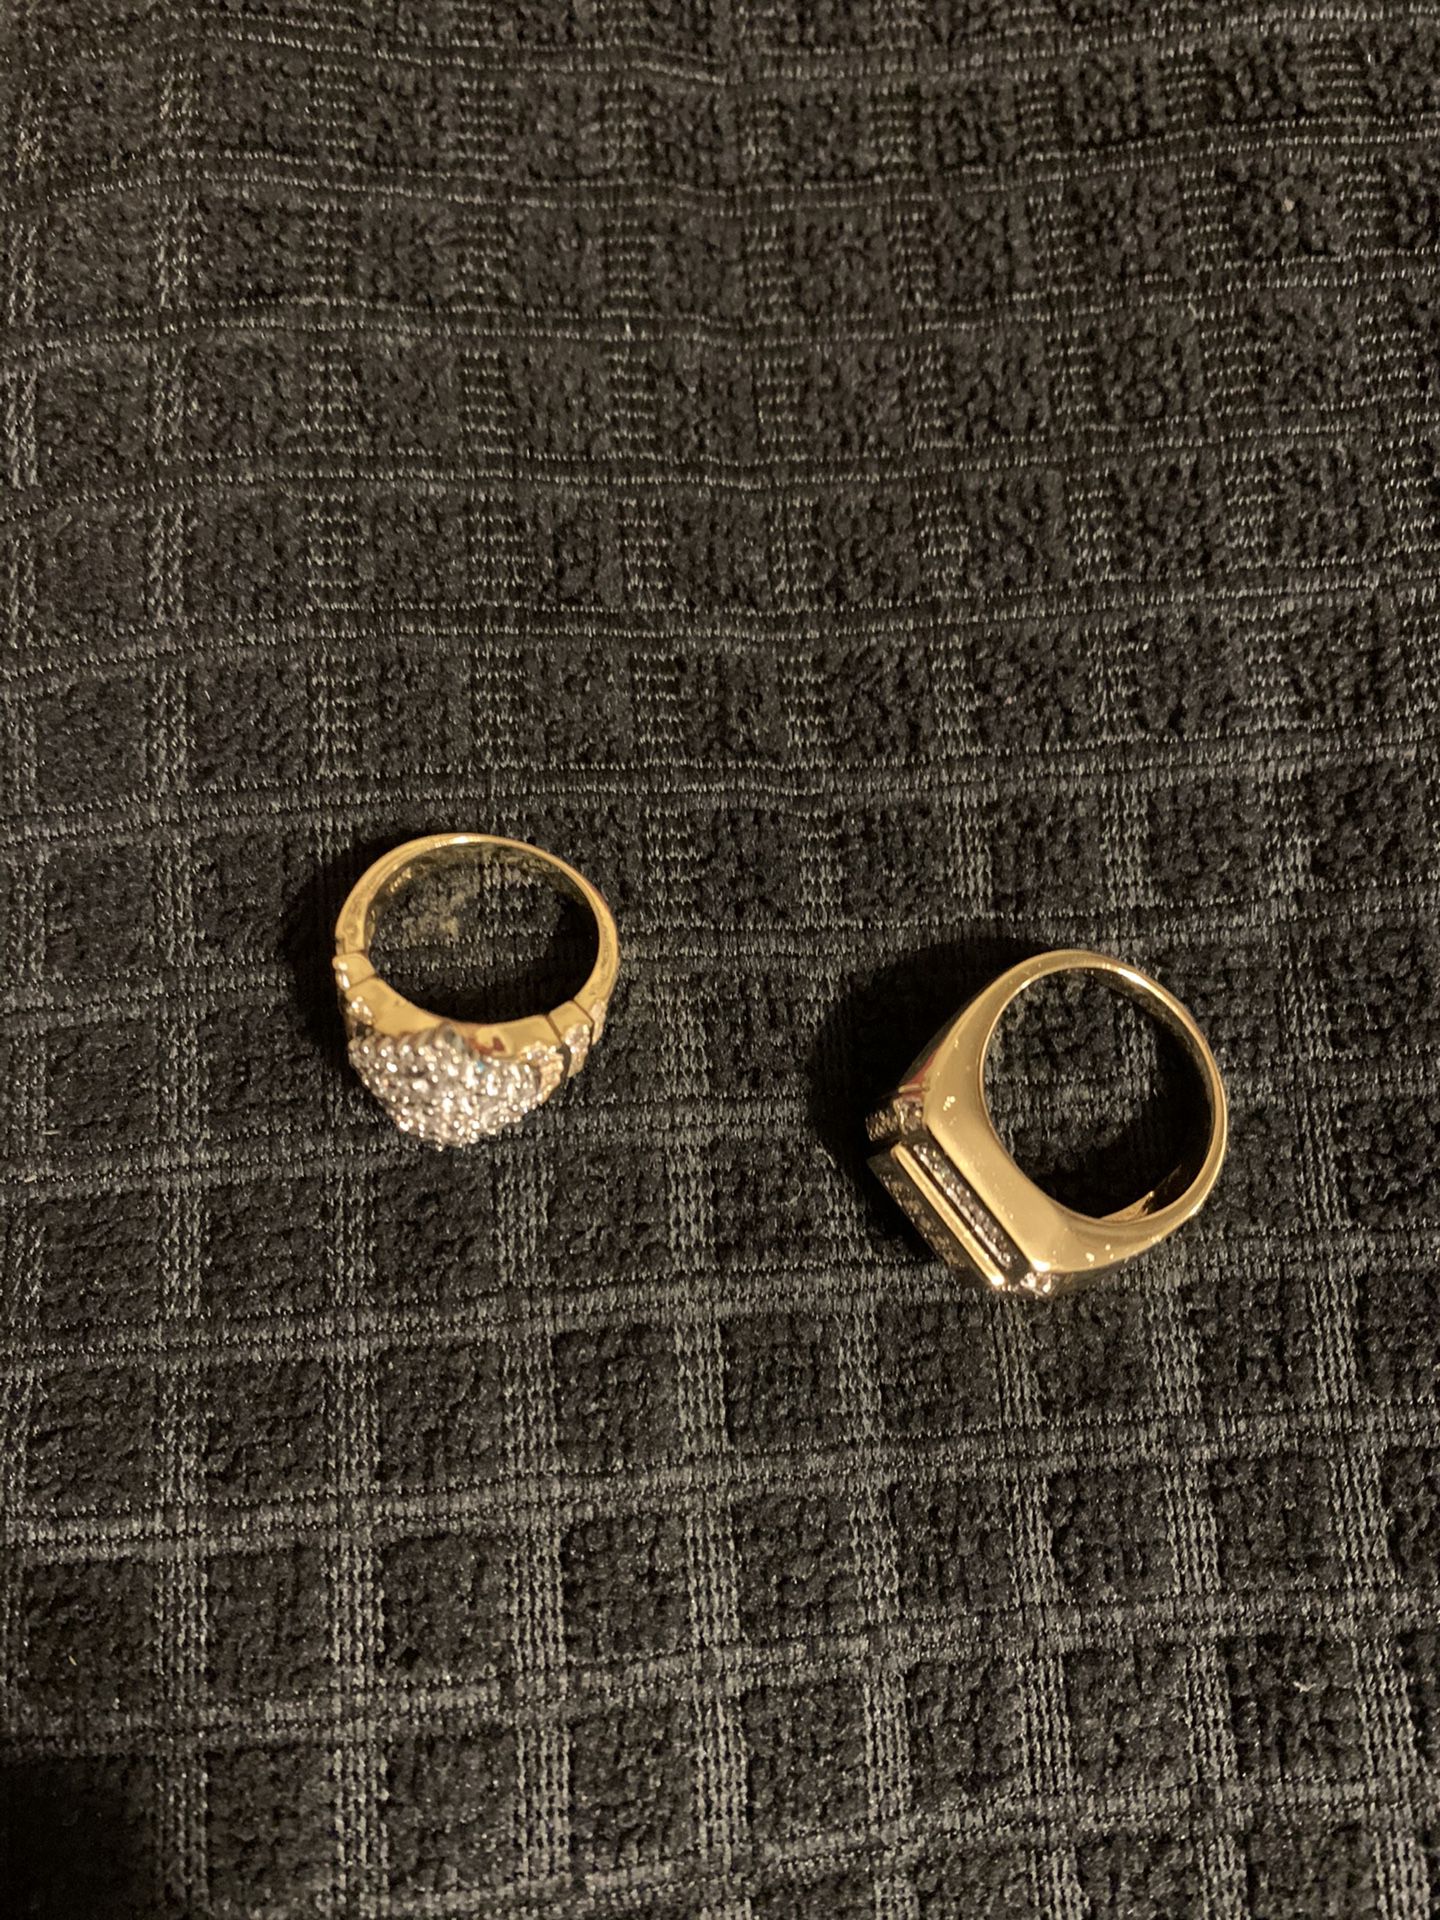 His and Her rings